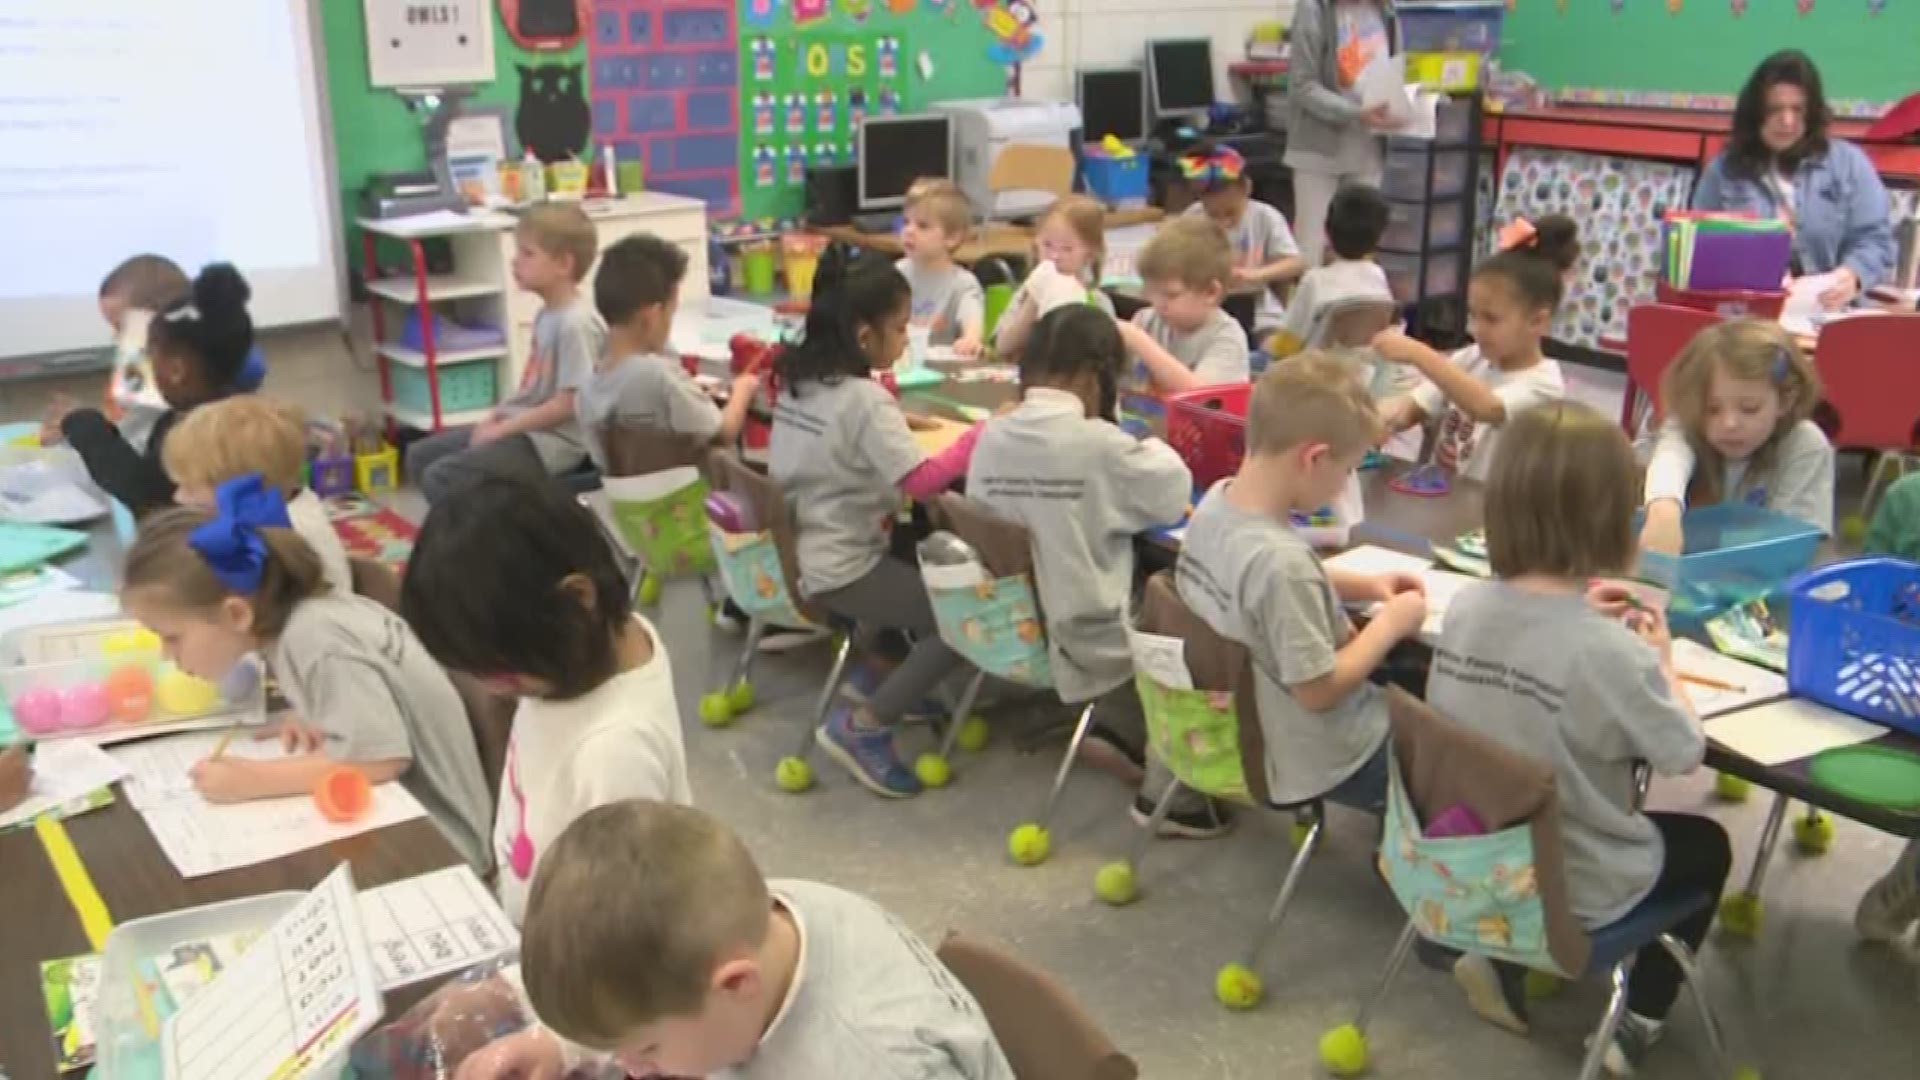 A new accountability rating system said Kentucky schools are not making process, showing test scores are flat.